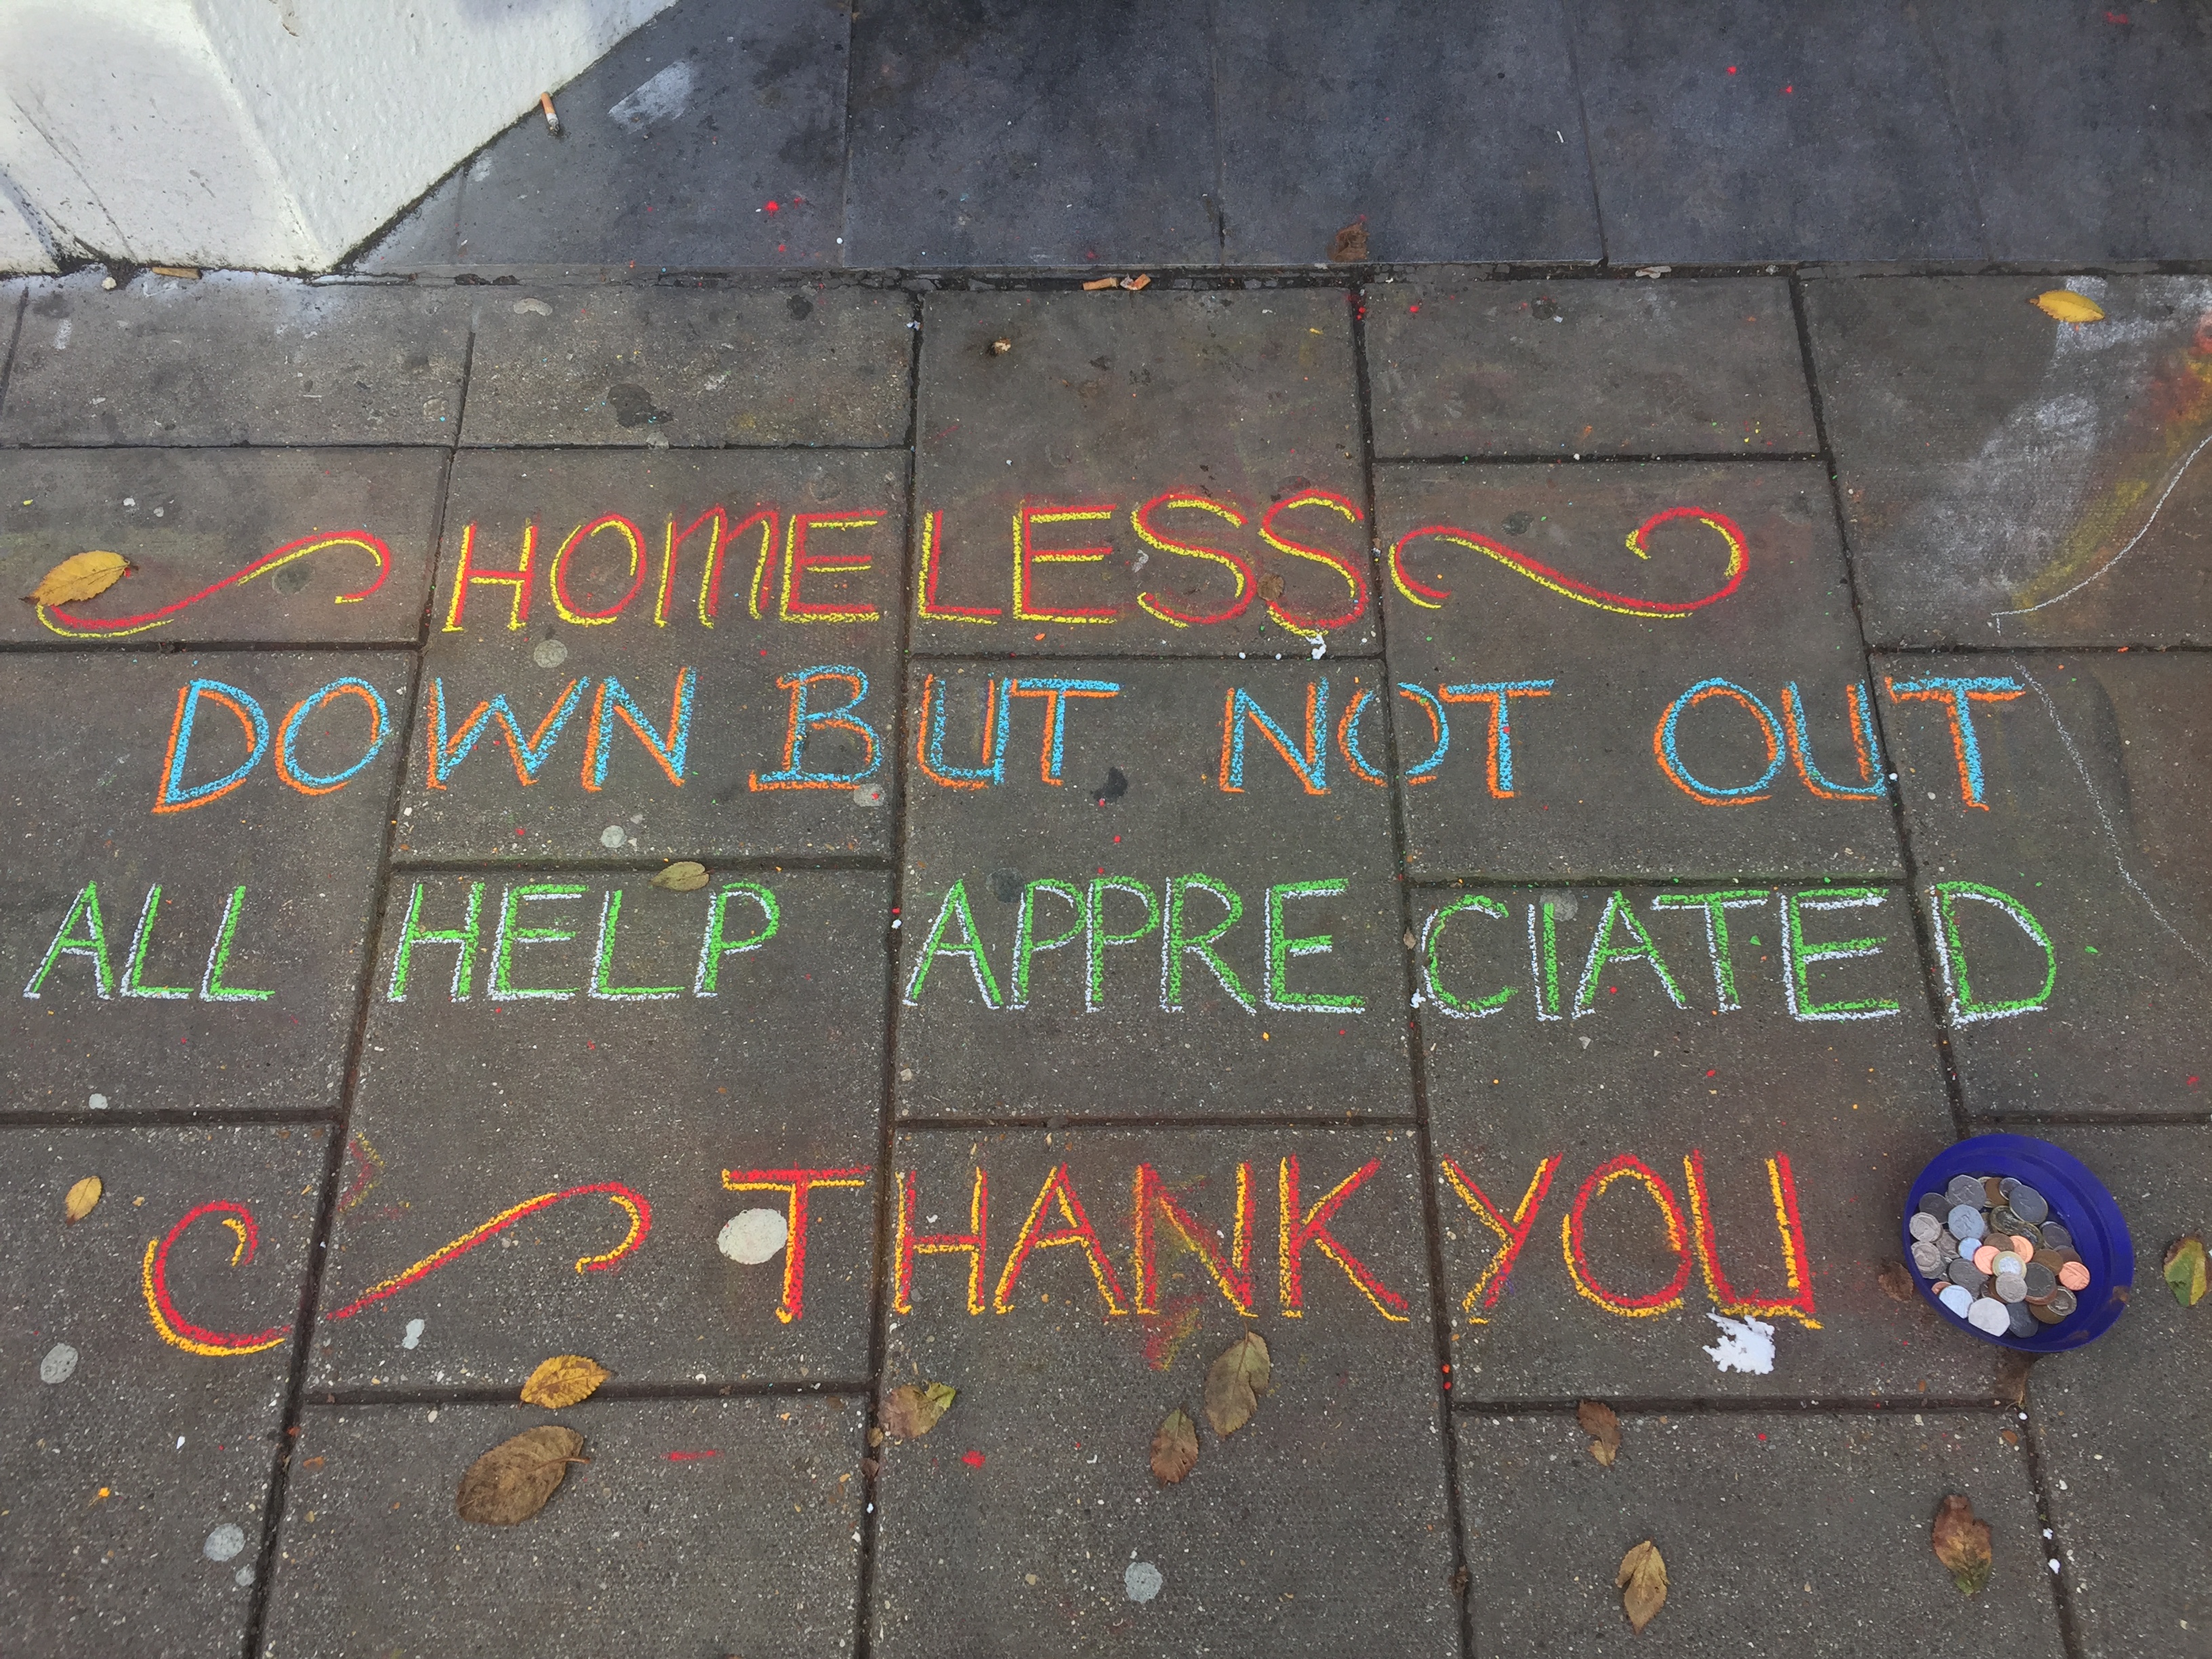 Homeless plea for help written on the ground